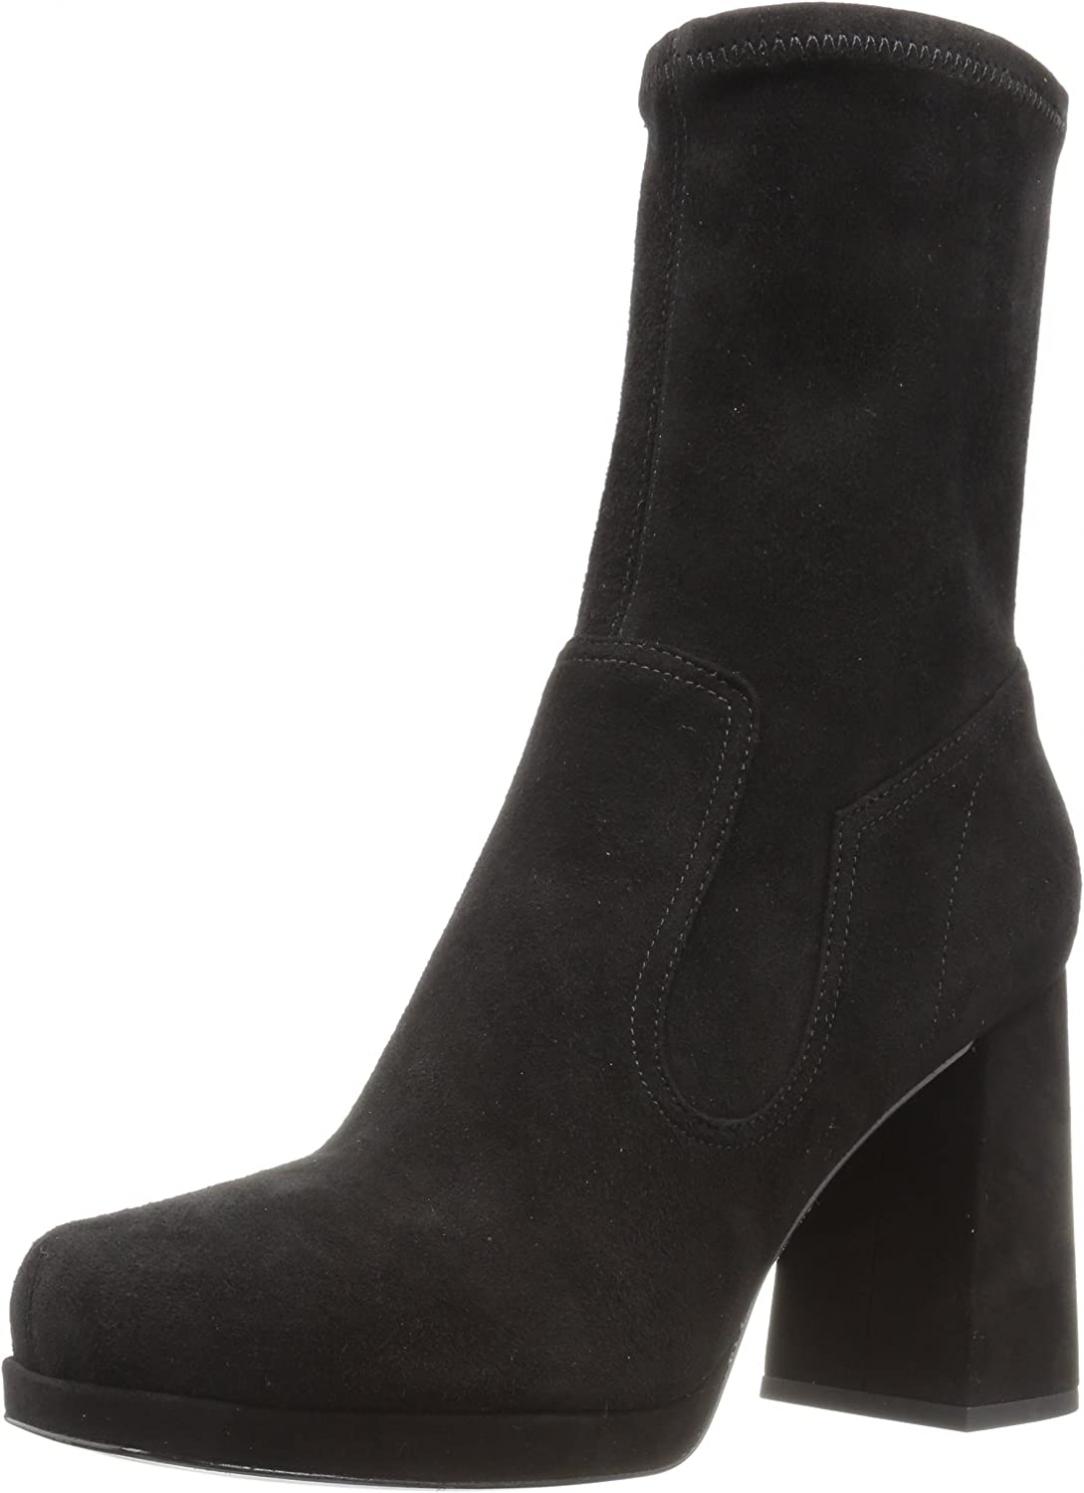 Marc Jacobs Women's Ross Stretch Ankle Boot